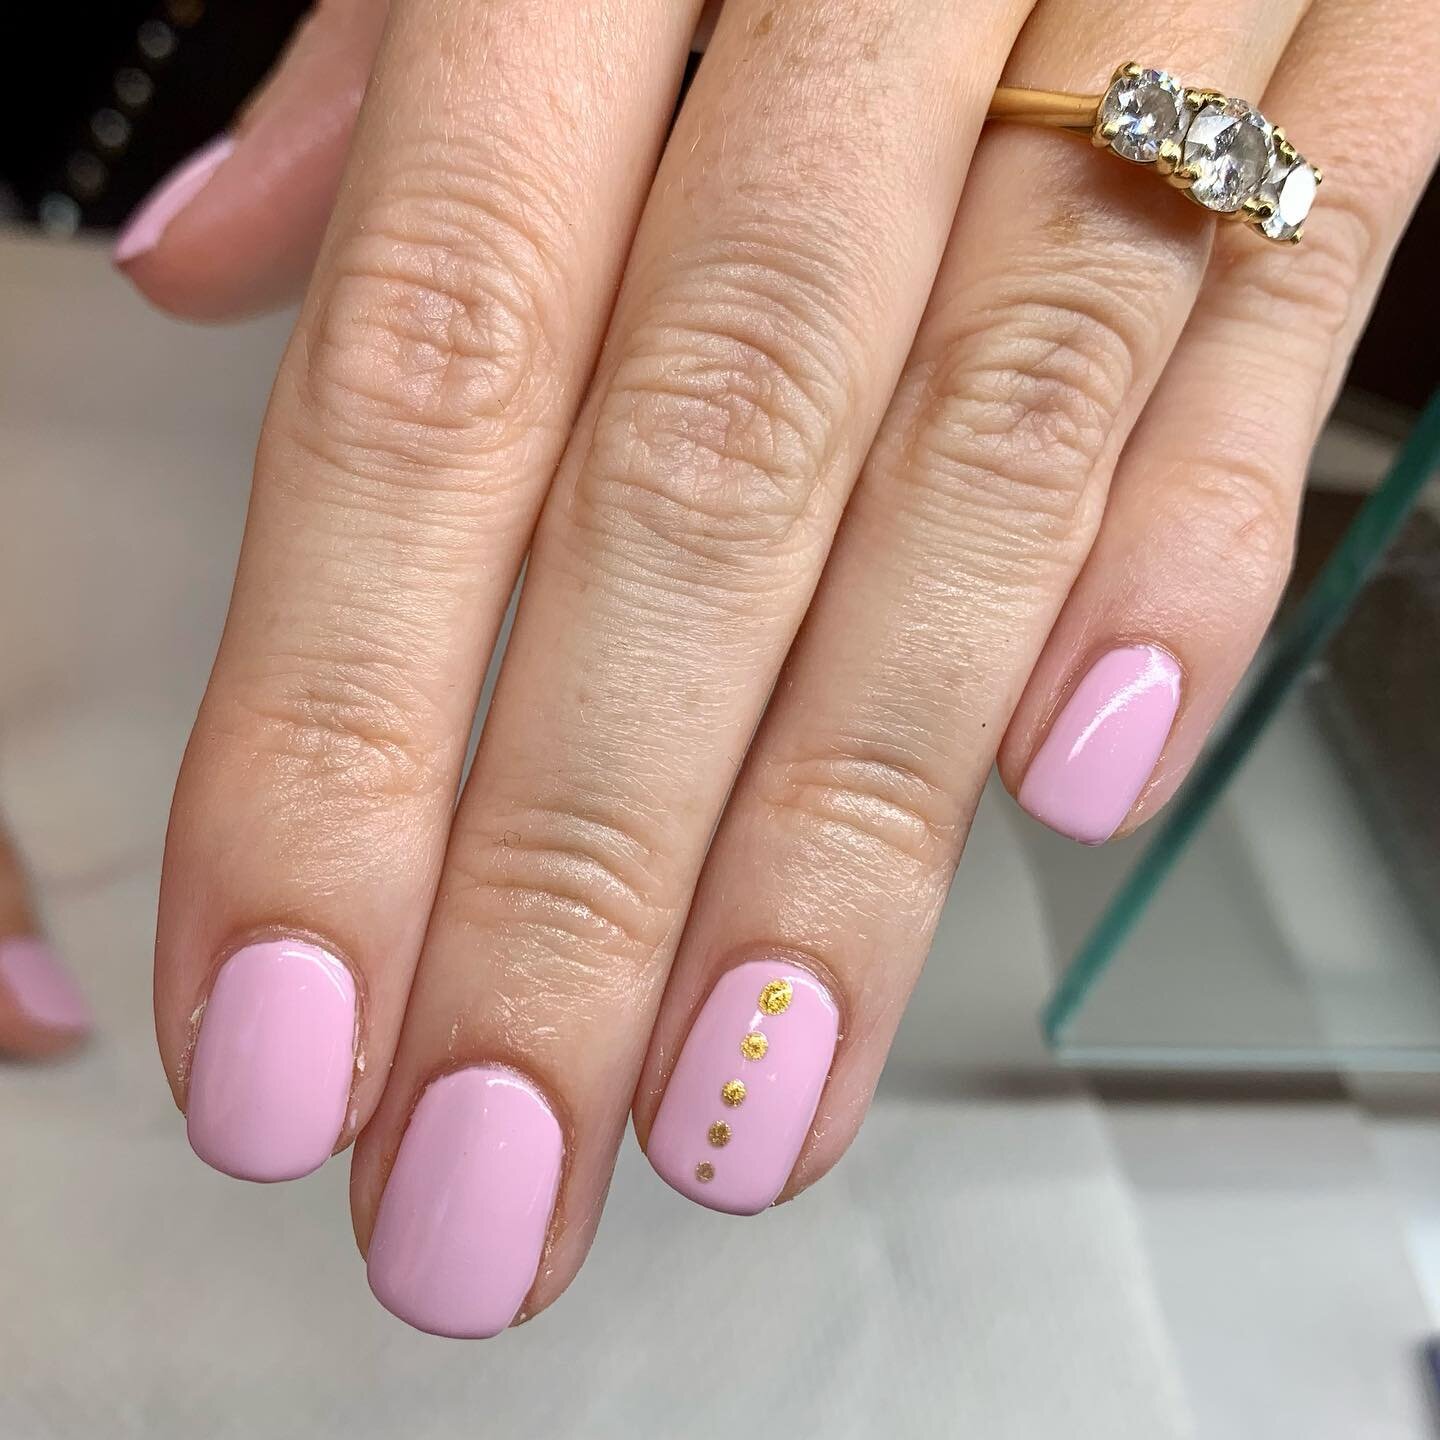 It&rsquo;s been wedding fever this week in the salon and we are feeling all the love 💗

🖌. Basic Nail Art by Kirsty